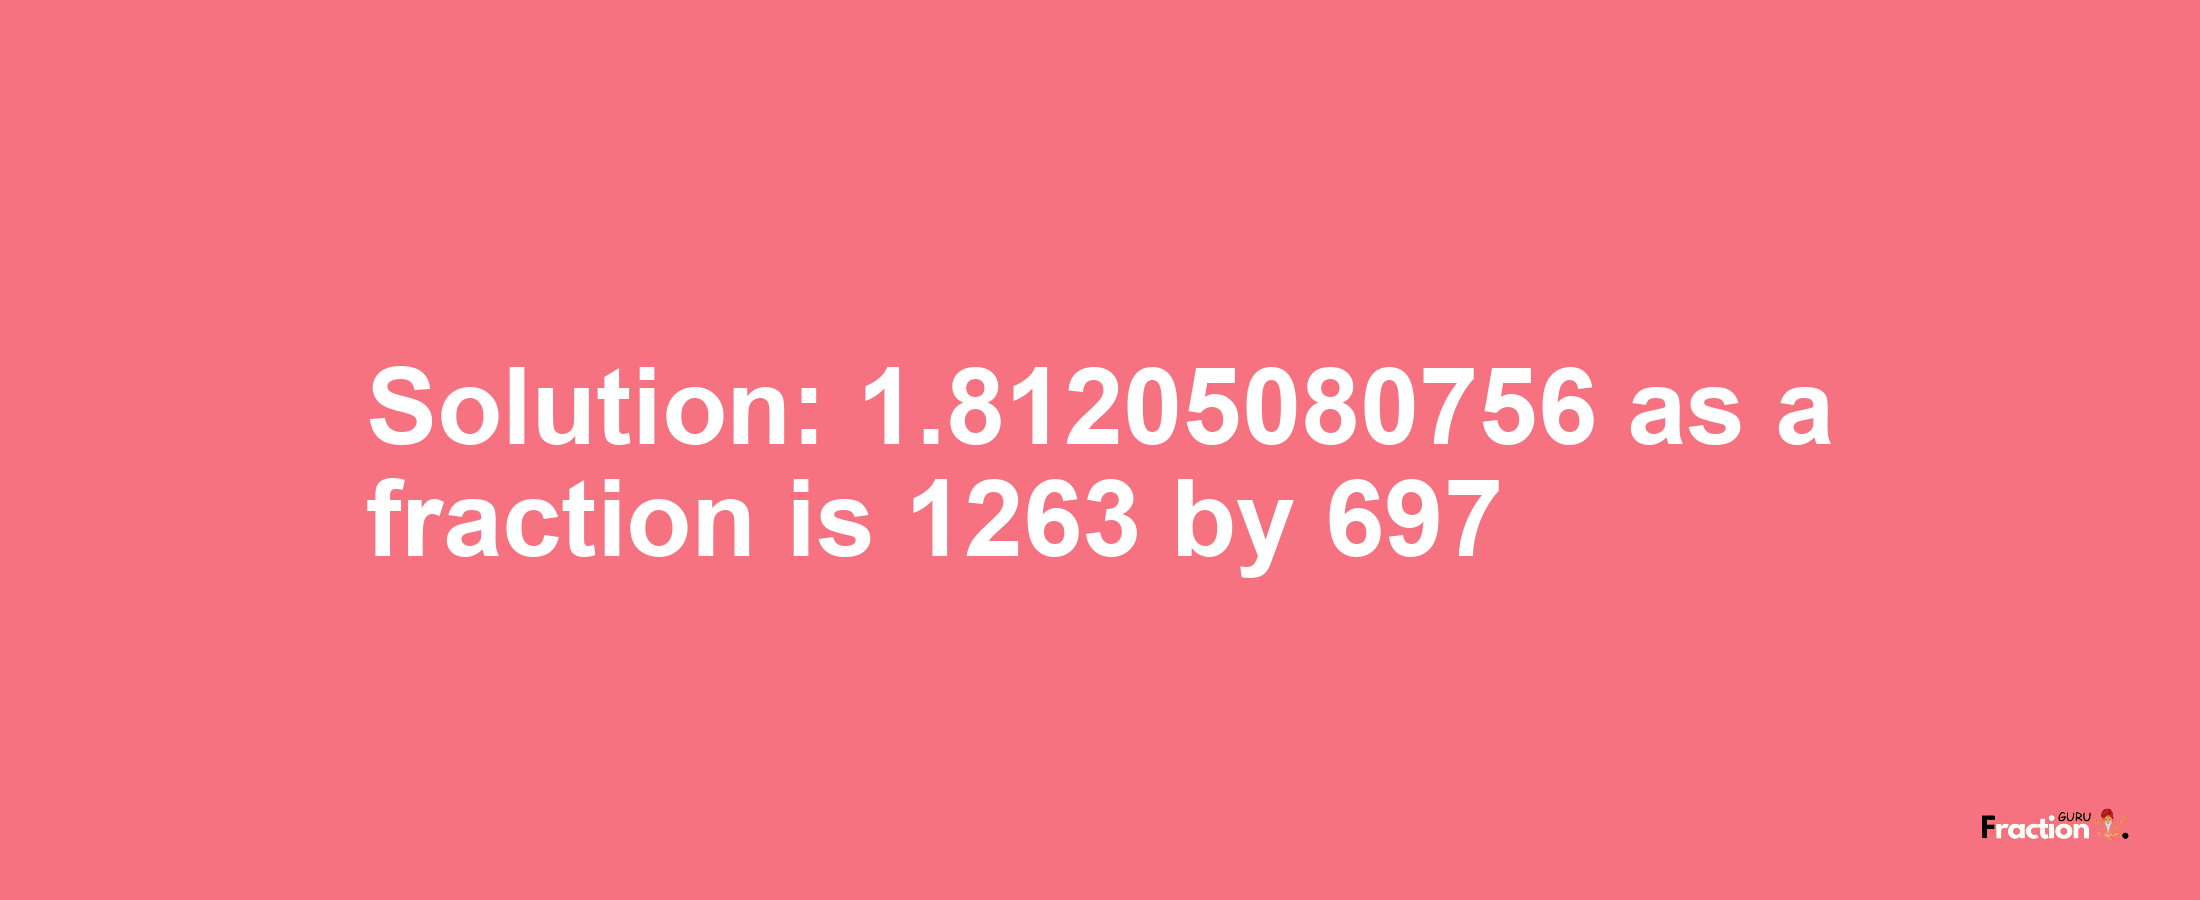 Solution:1.81205080756 as a fraction is 1263/697